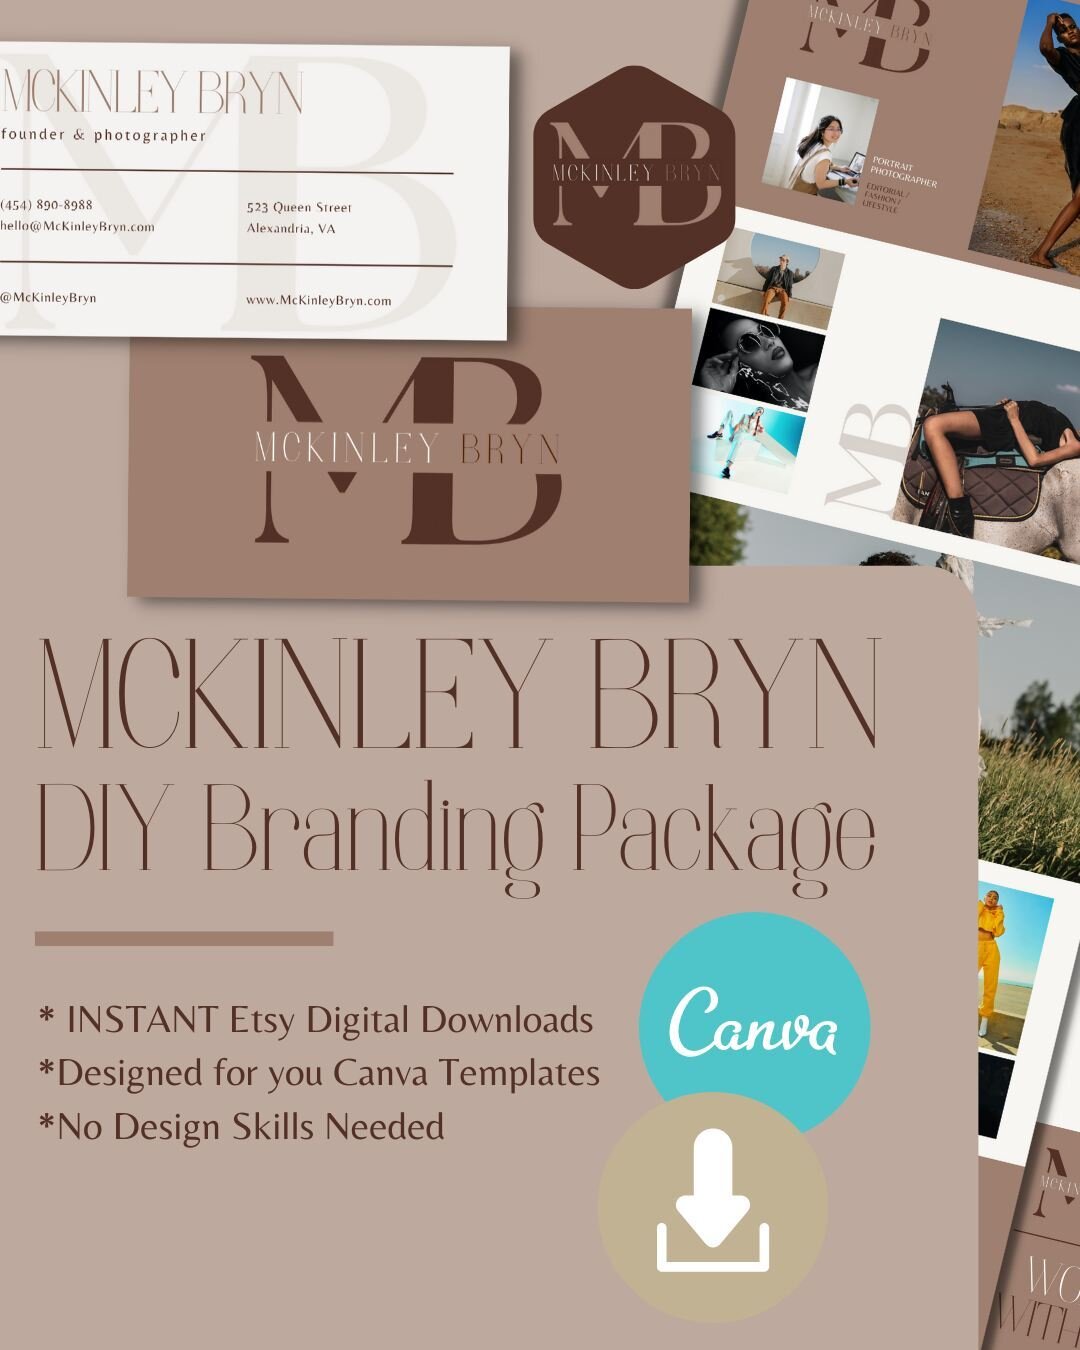 ✨ DIY Canva Branding Package ✨⁠
⁠
Do you want to step up your branding game in 2023? Not ready to hire a graphic designer?⁠
⁠
Introducing the McKinley Bryn DIY Branding Package! This easy-to-use branding package was built in Canva for simple editing 